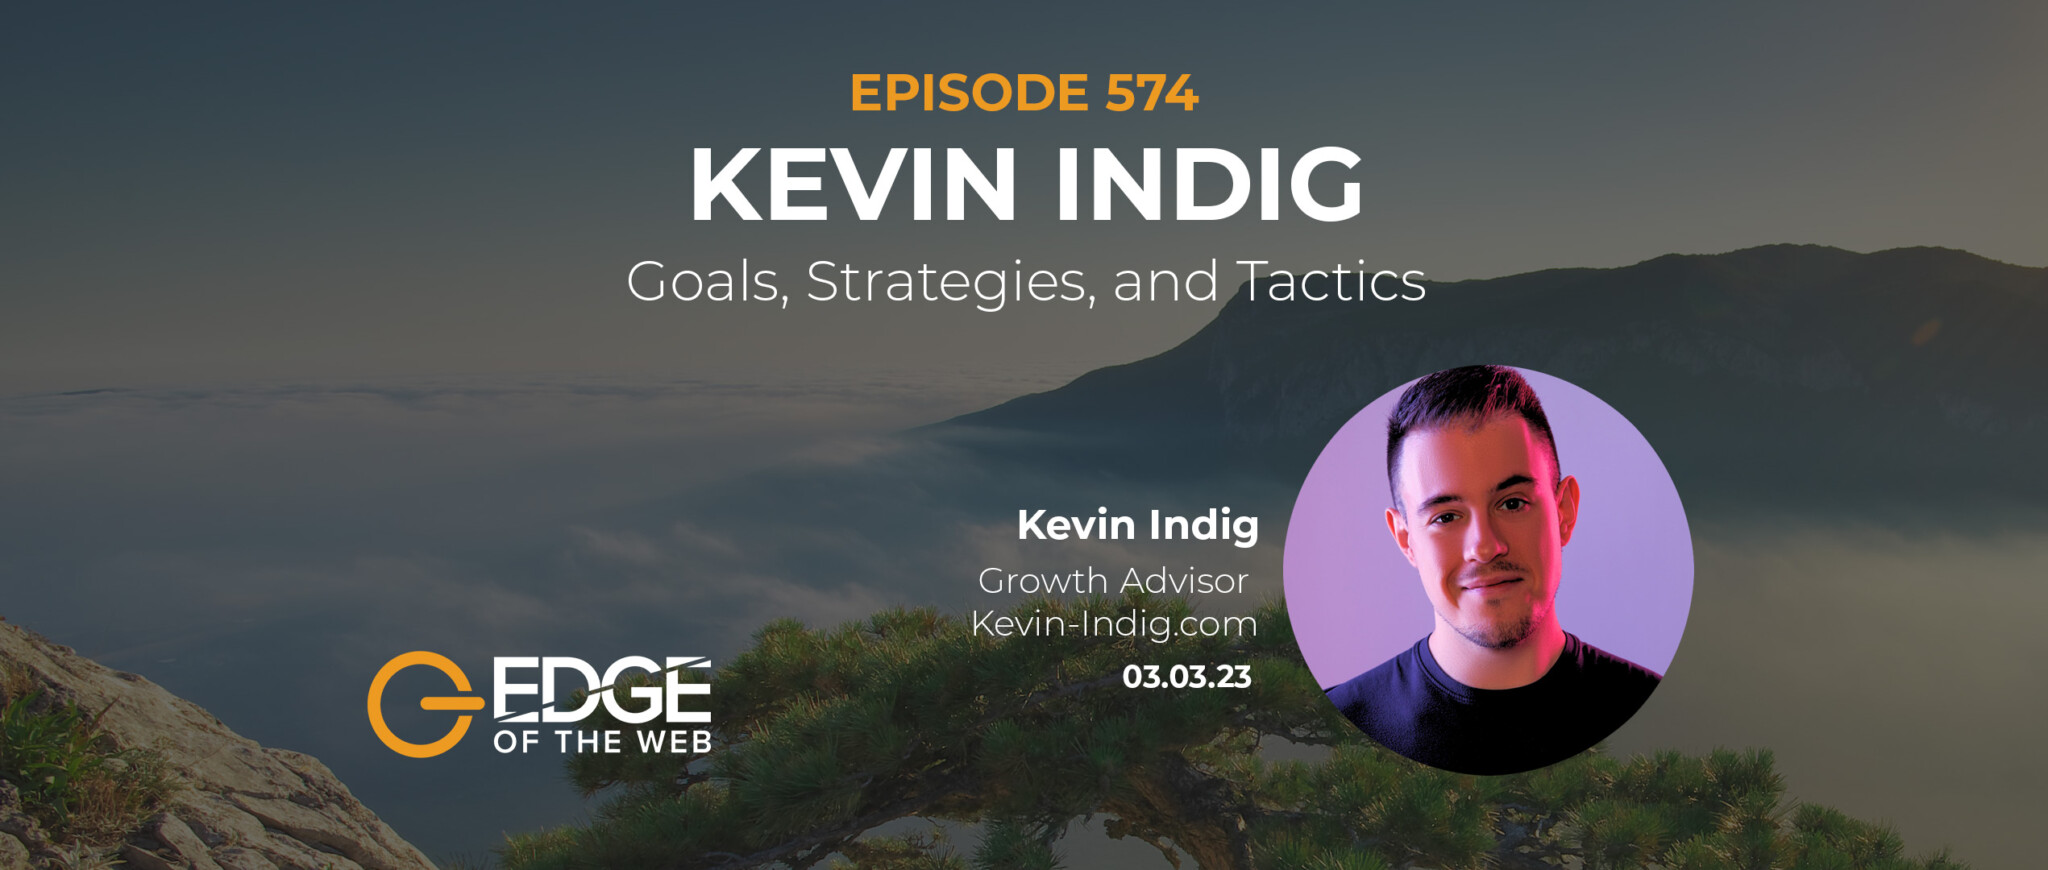 Kevin Indig EDGE Episode 574 Featured Image